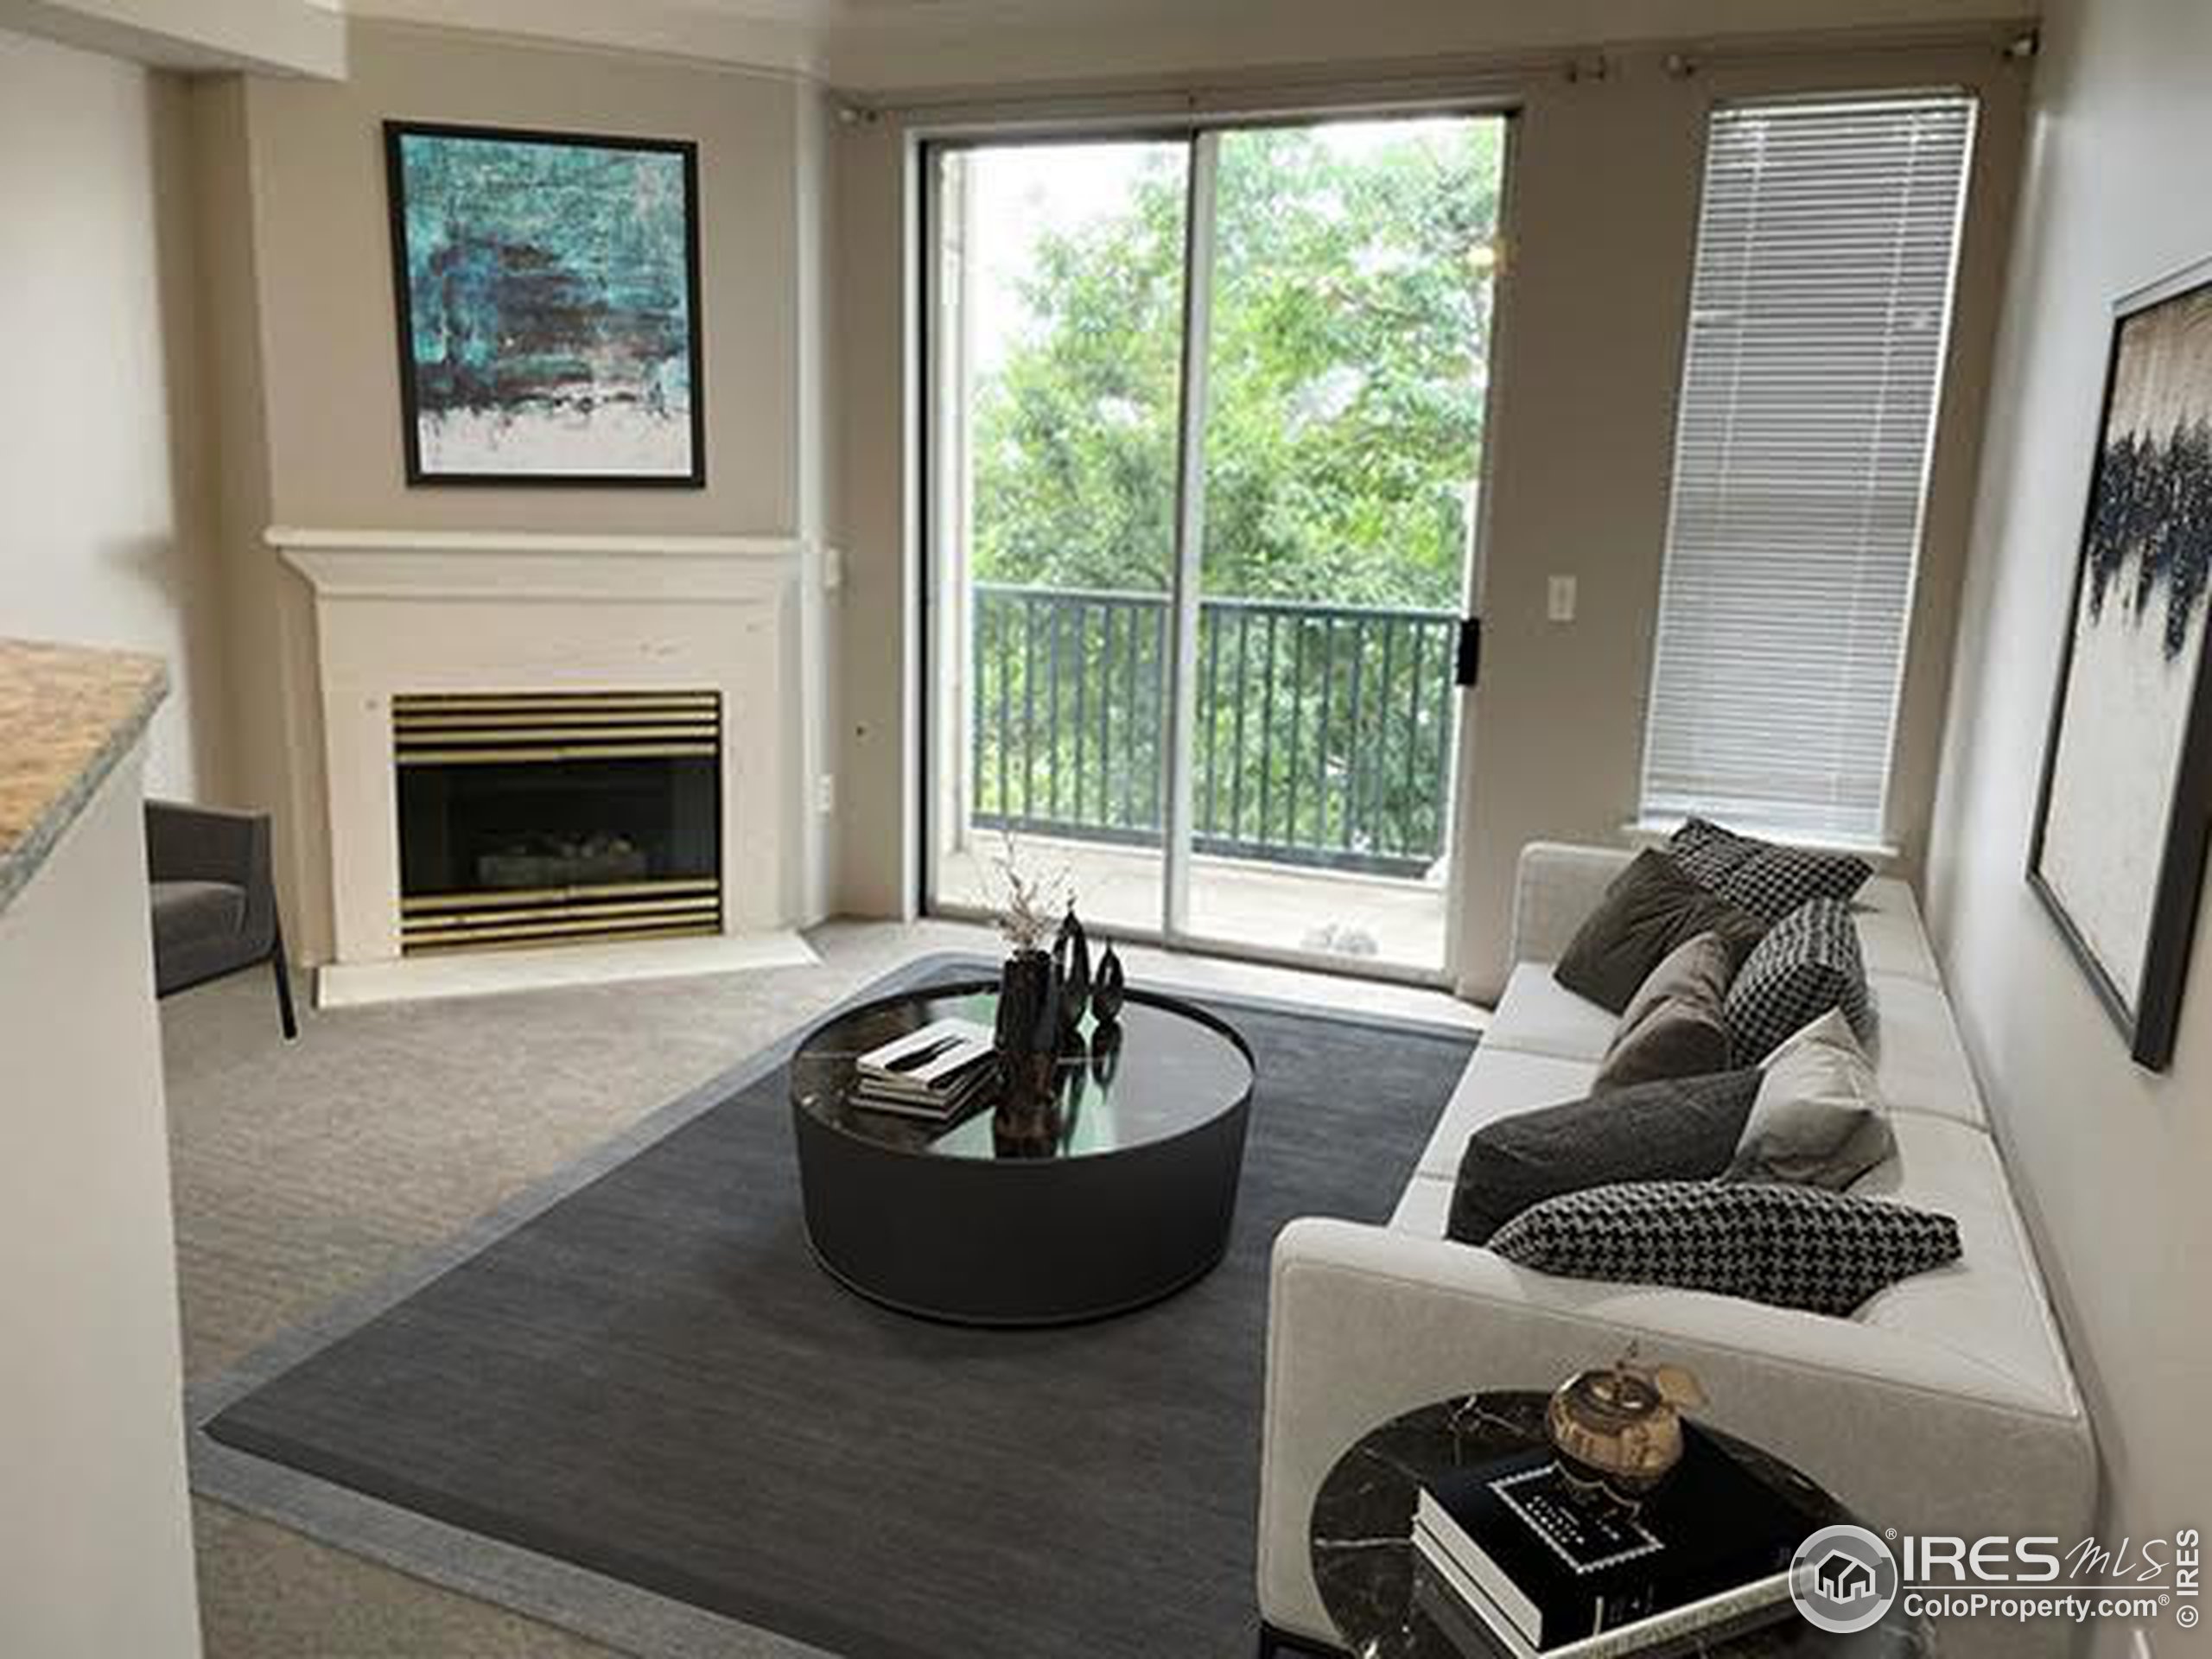 Living room with gas fireplace and balcony